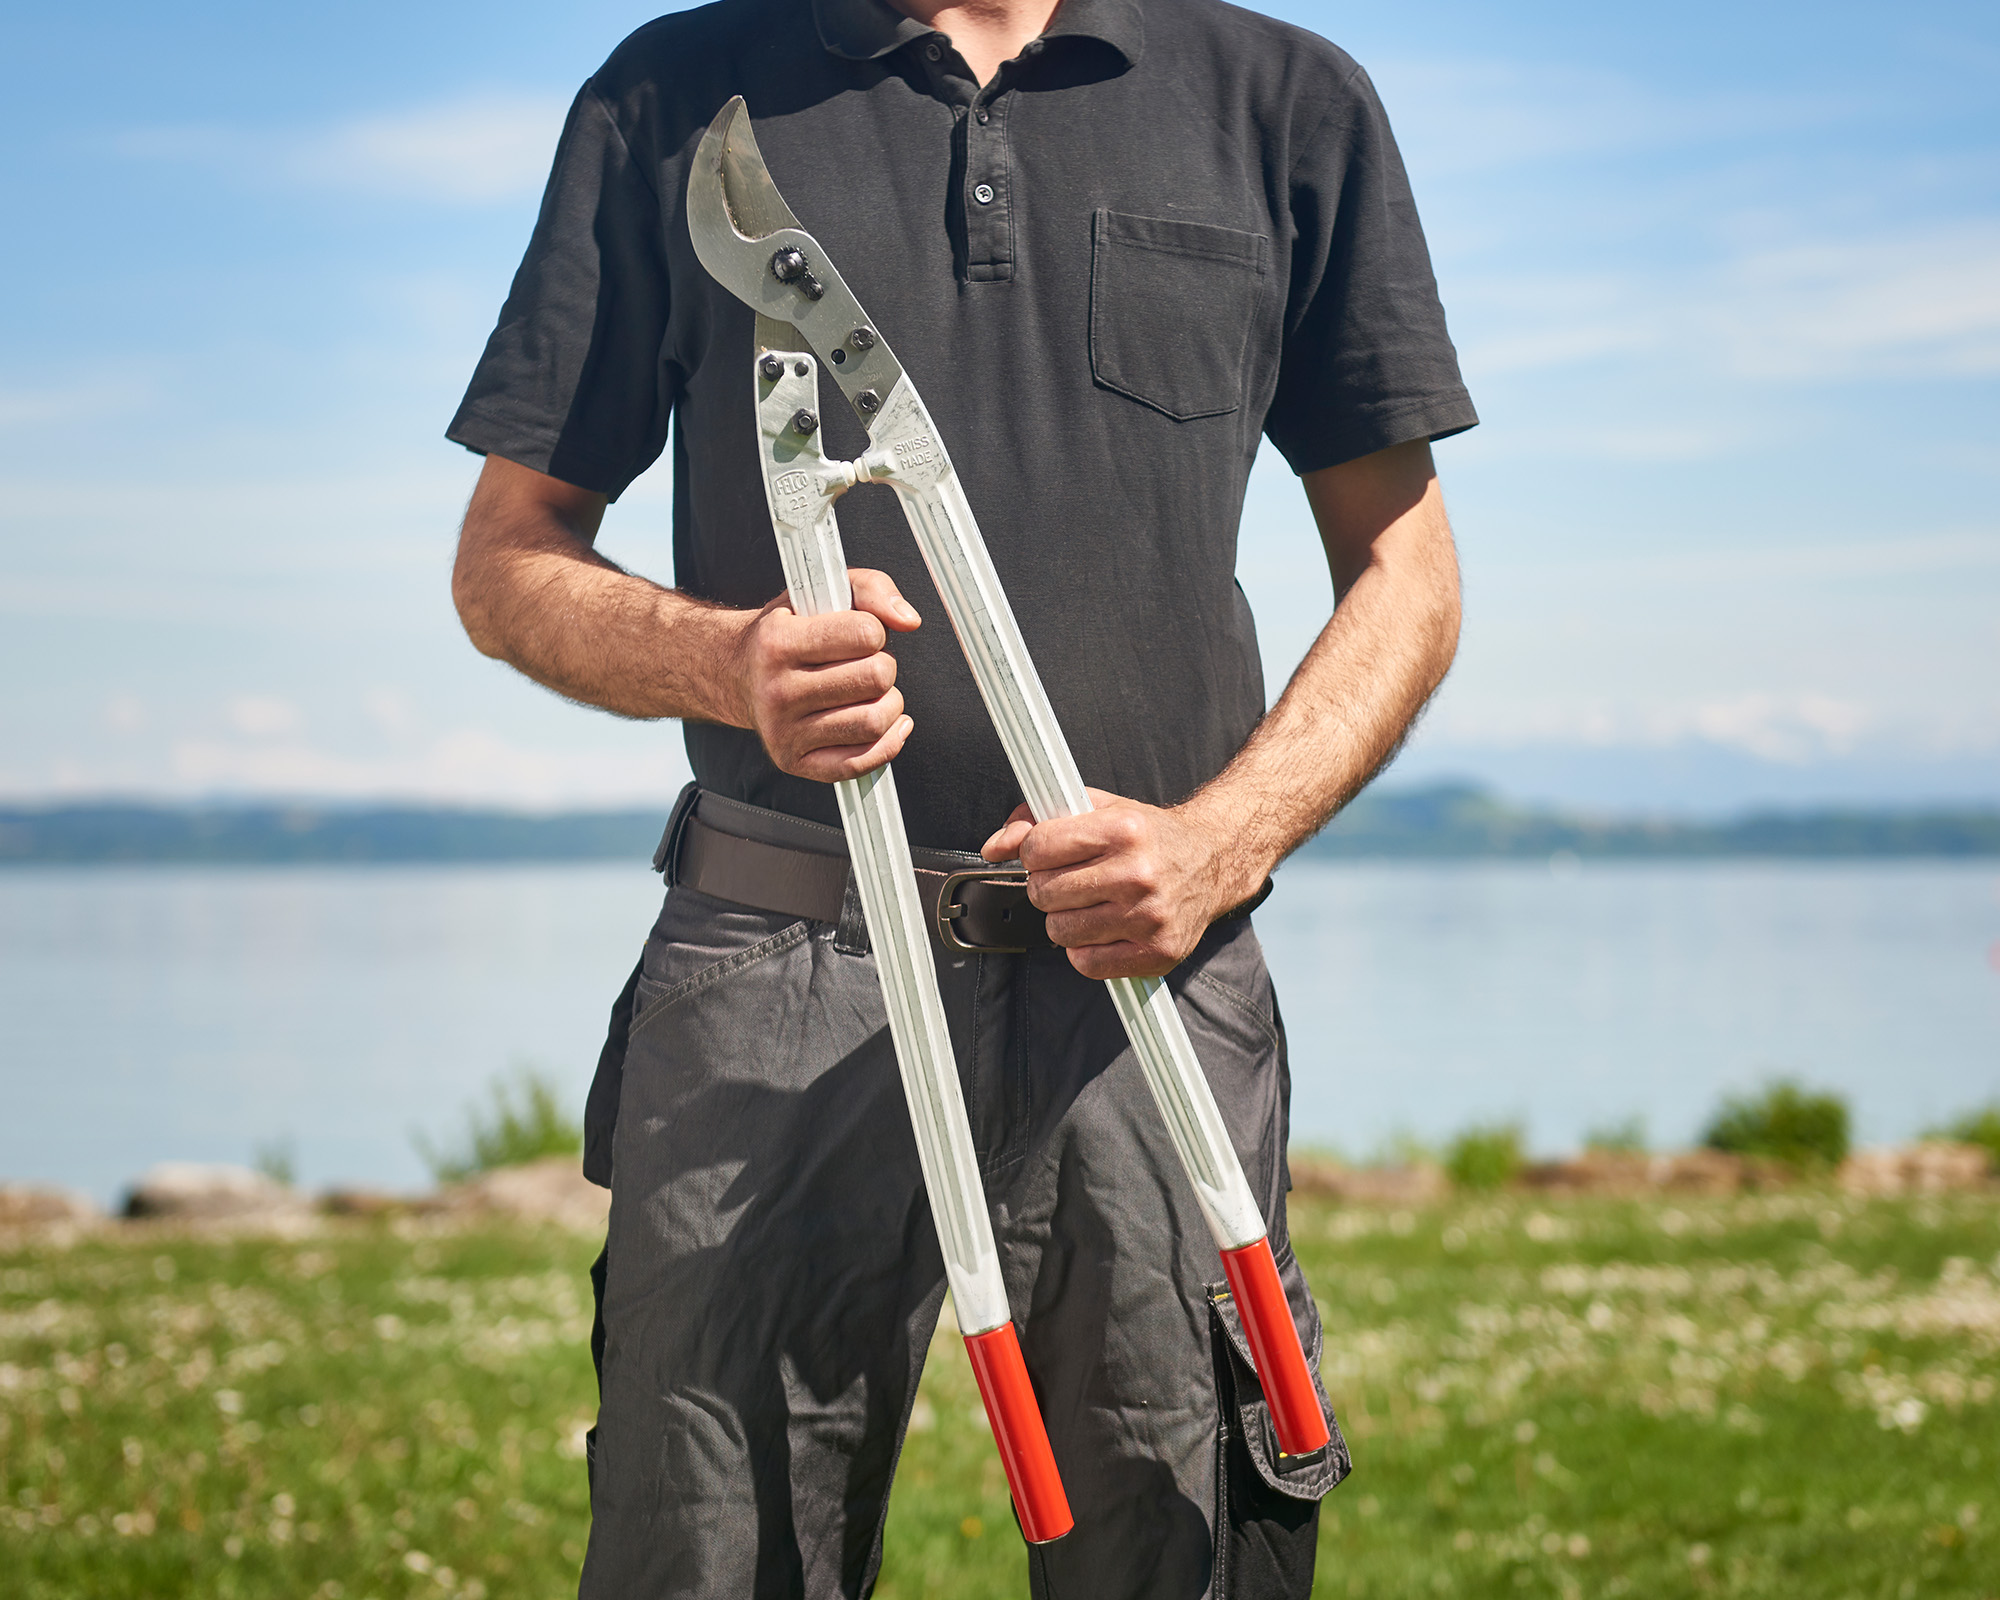 Felco 22 pruning lopper with solid aluminium handles for maximum leverage and strength